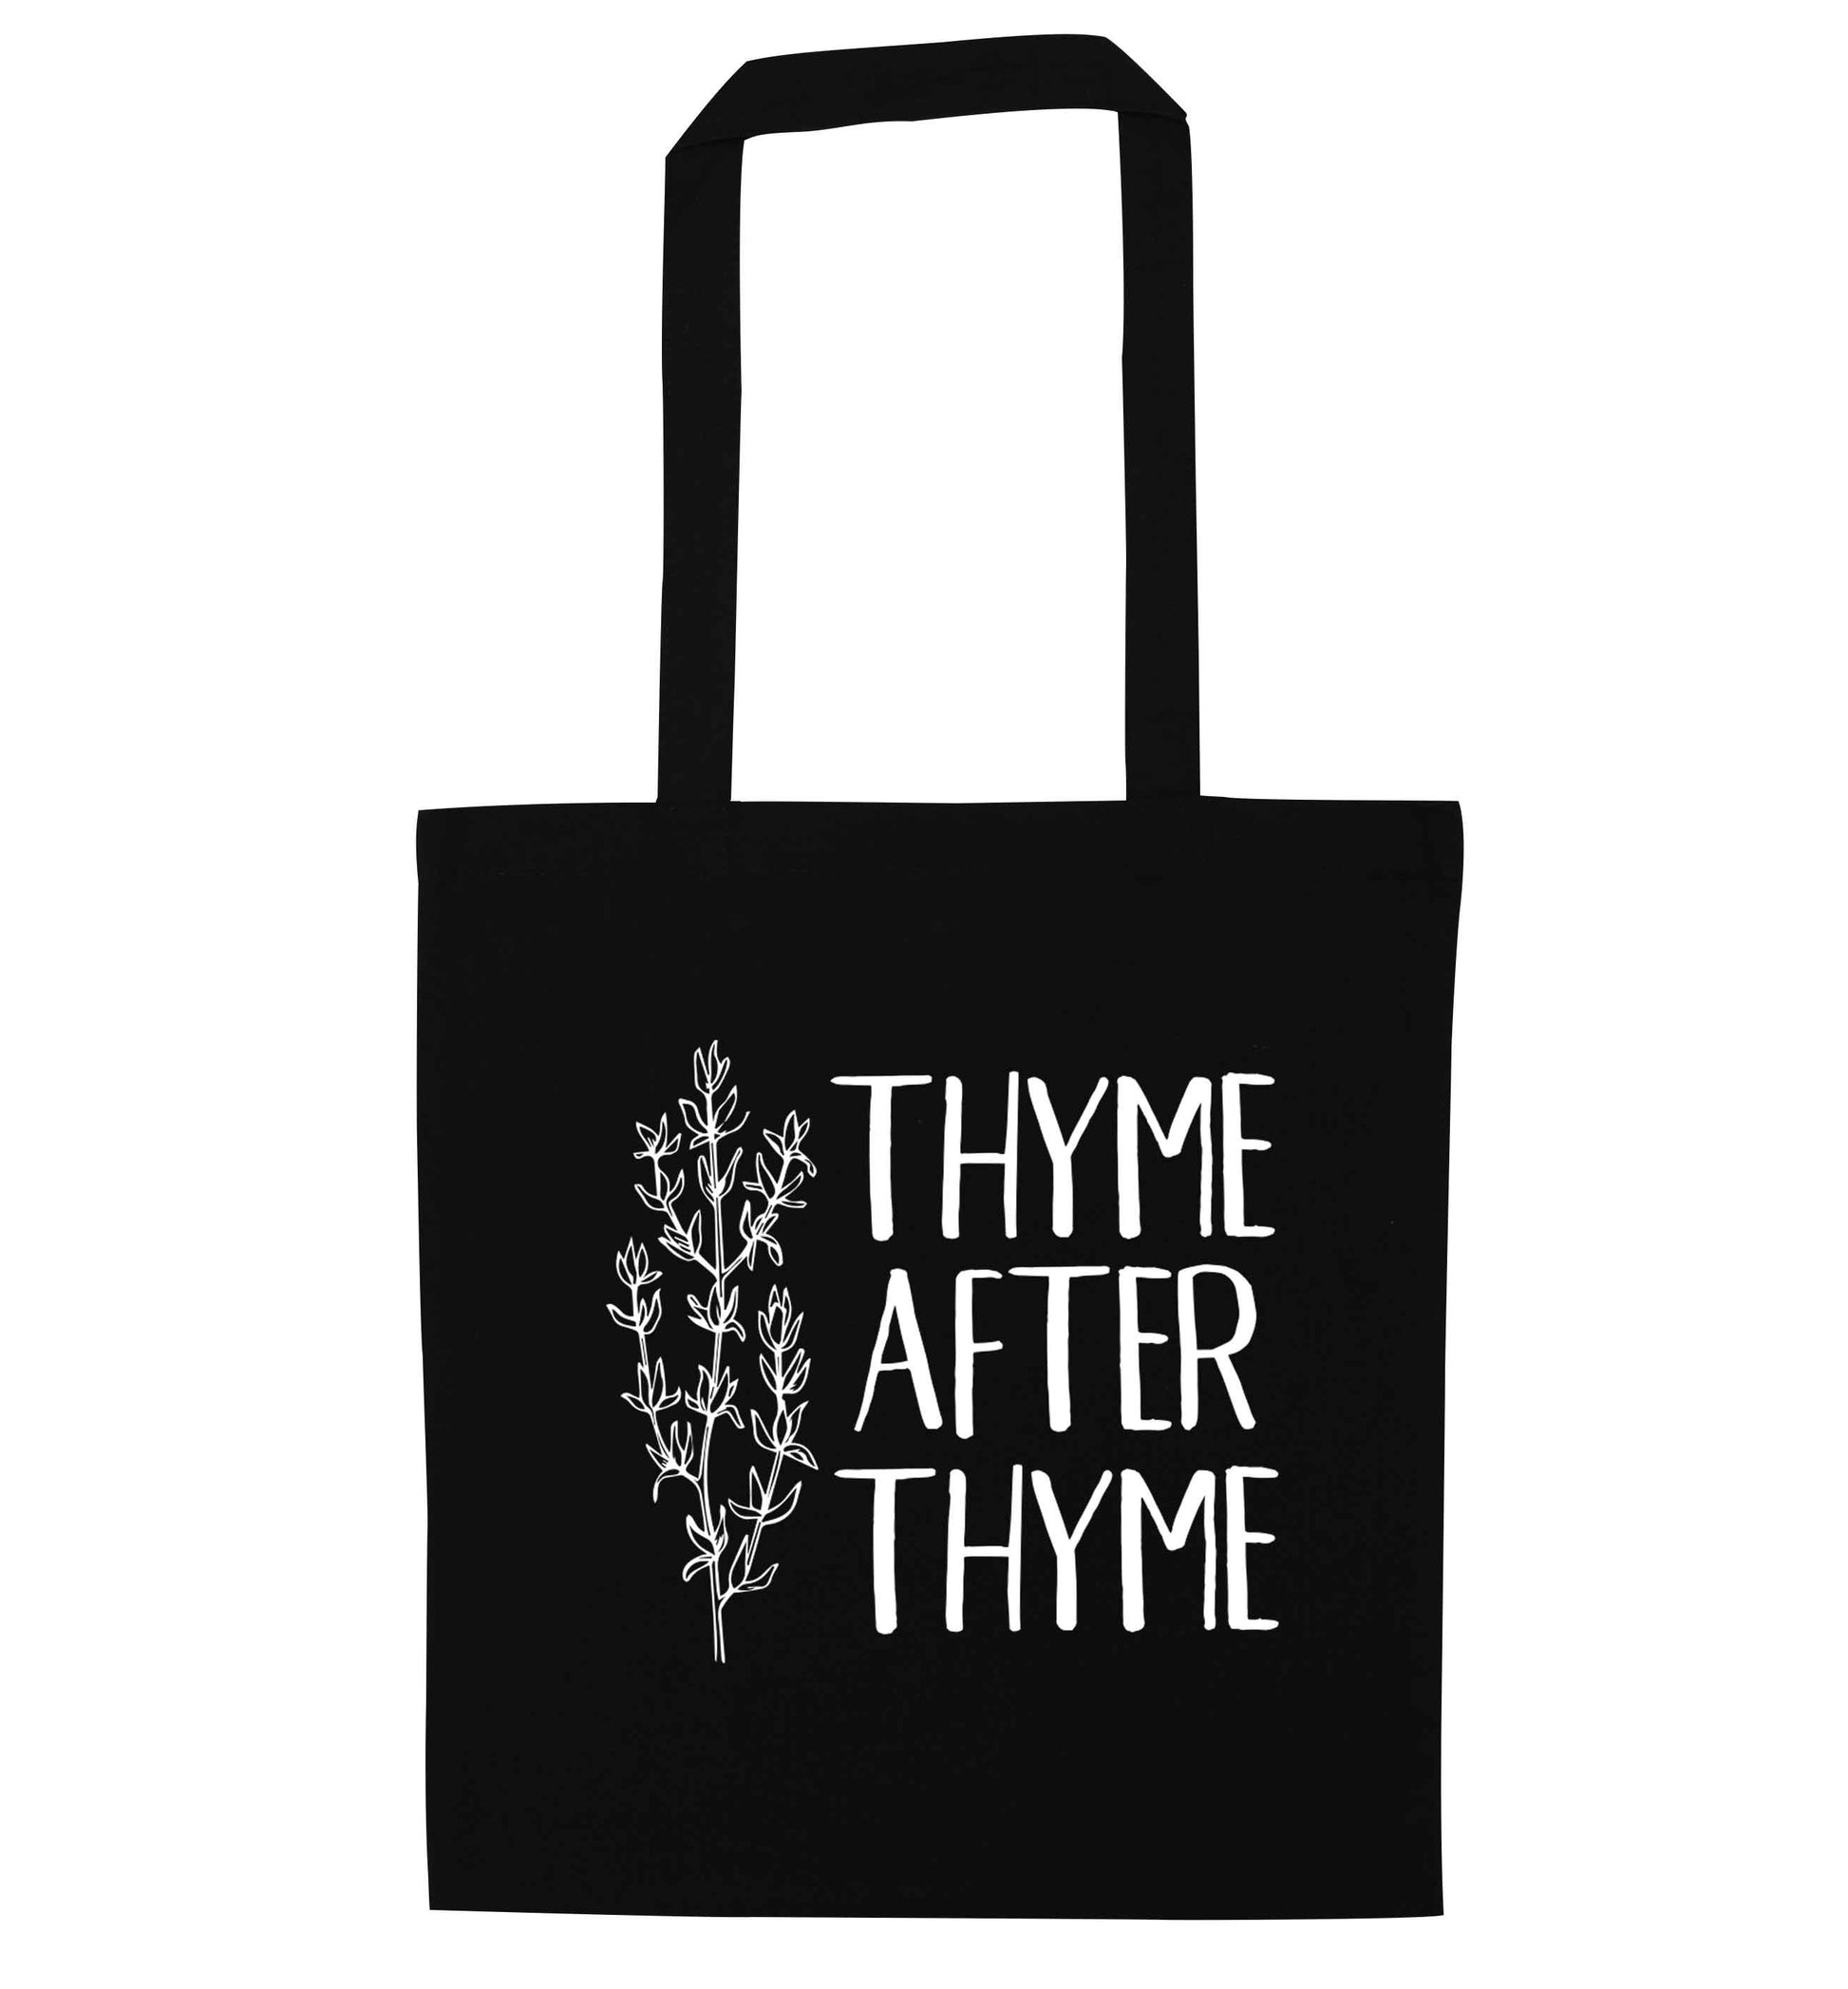 Thyme after thyme black tote bag